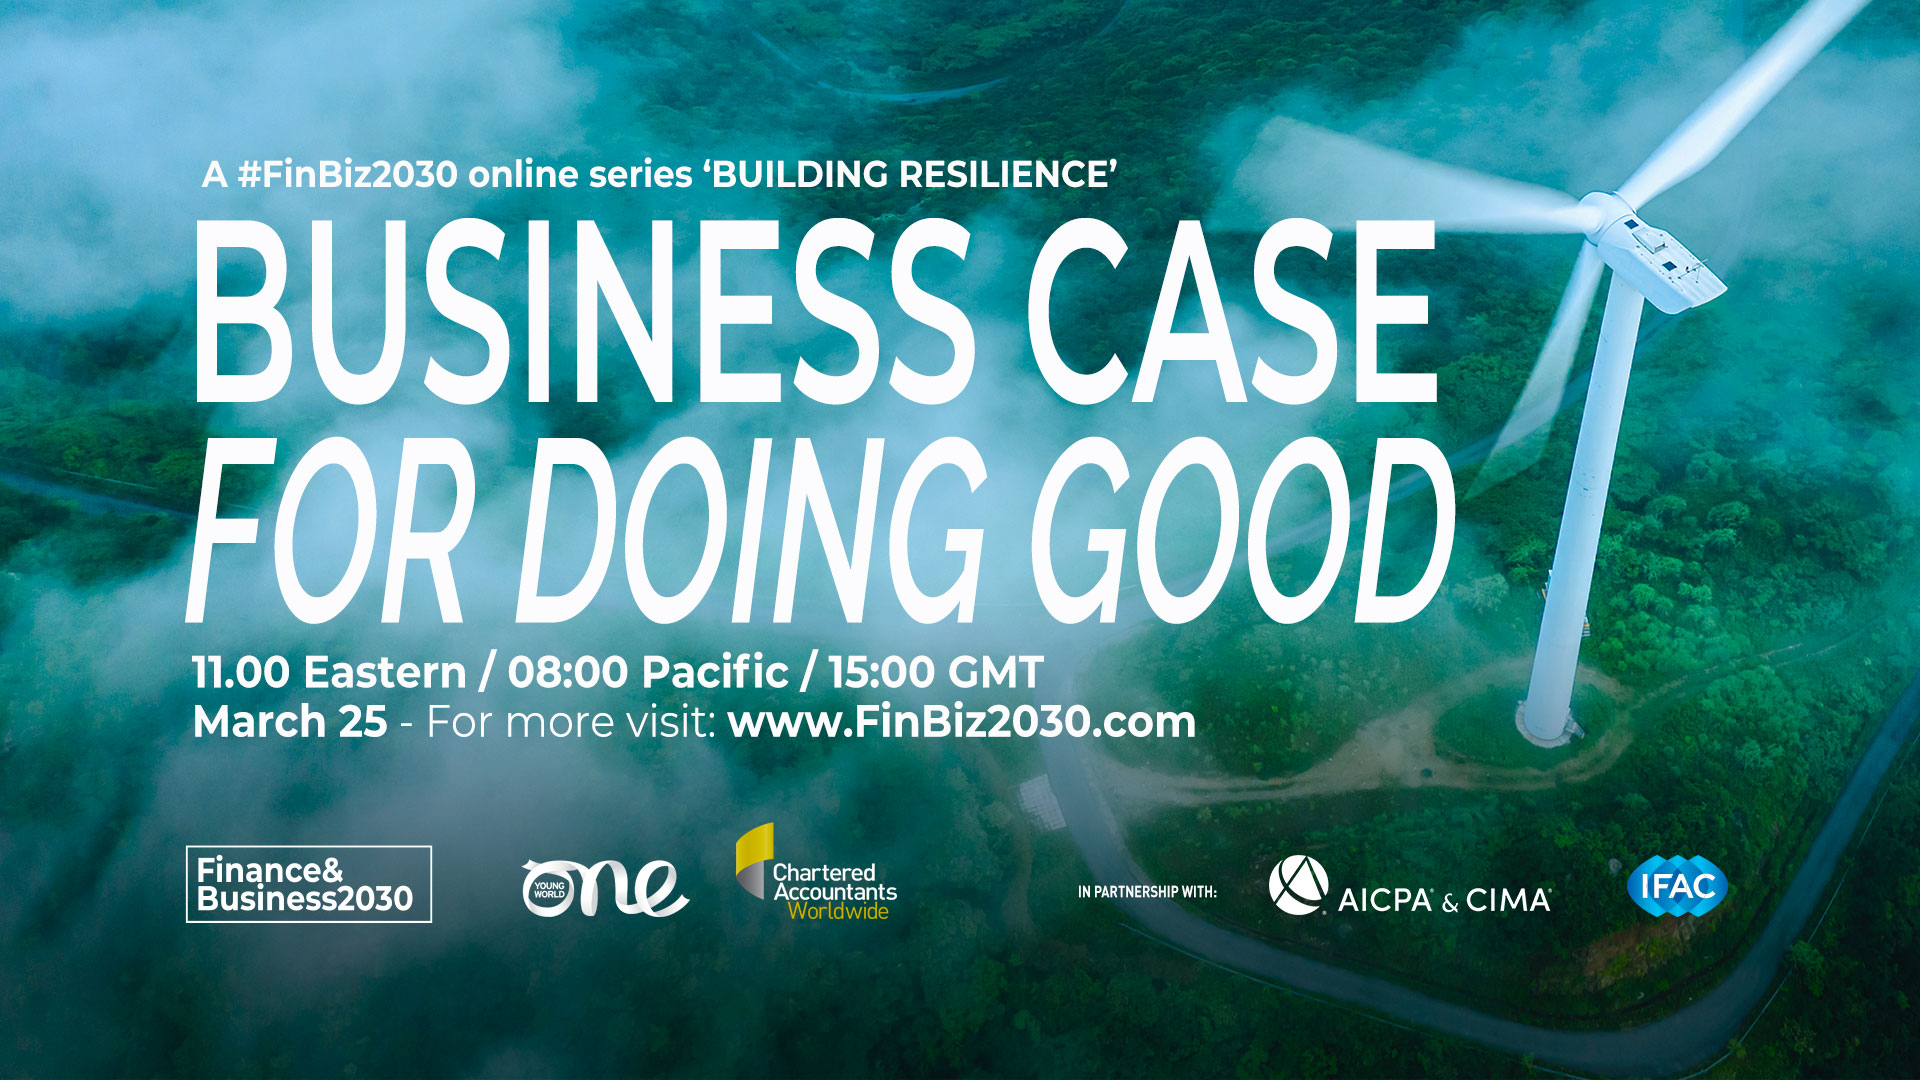 The Business case for doing good - a #FinBiz2030 online series 'Building Resilience'